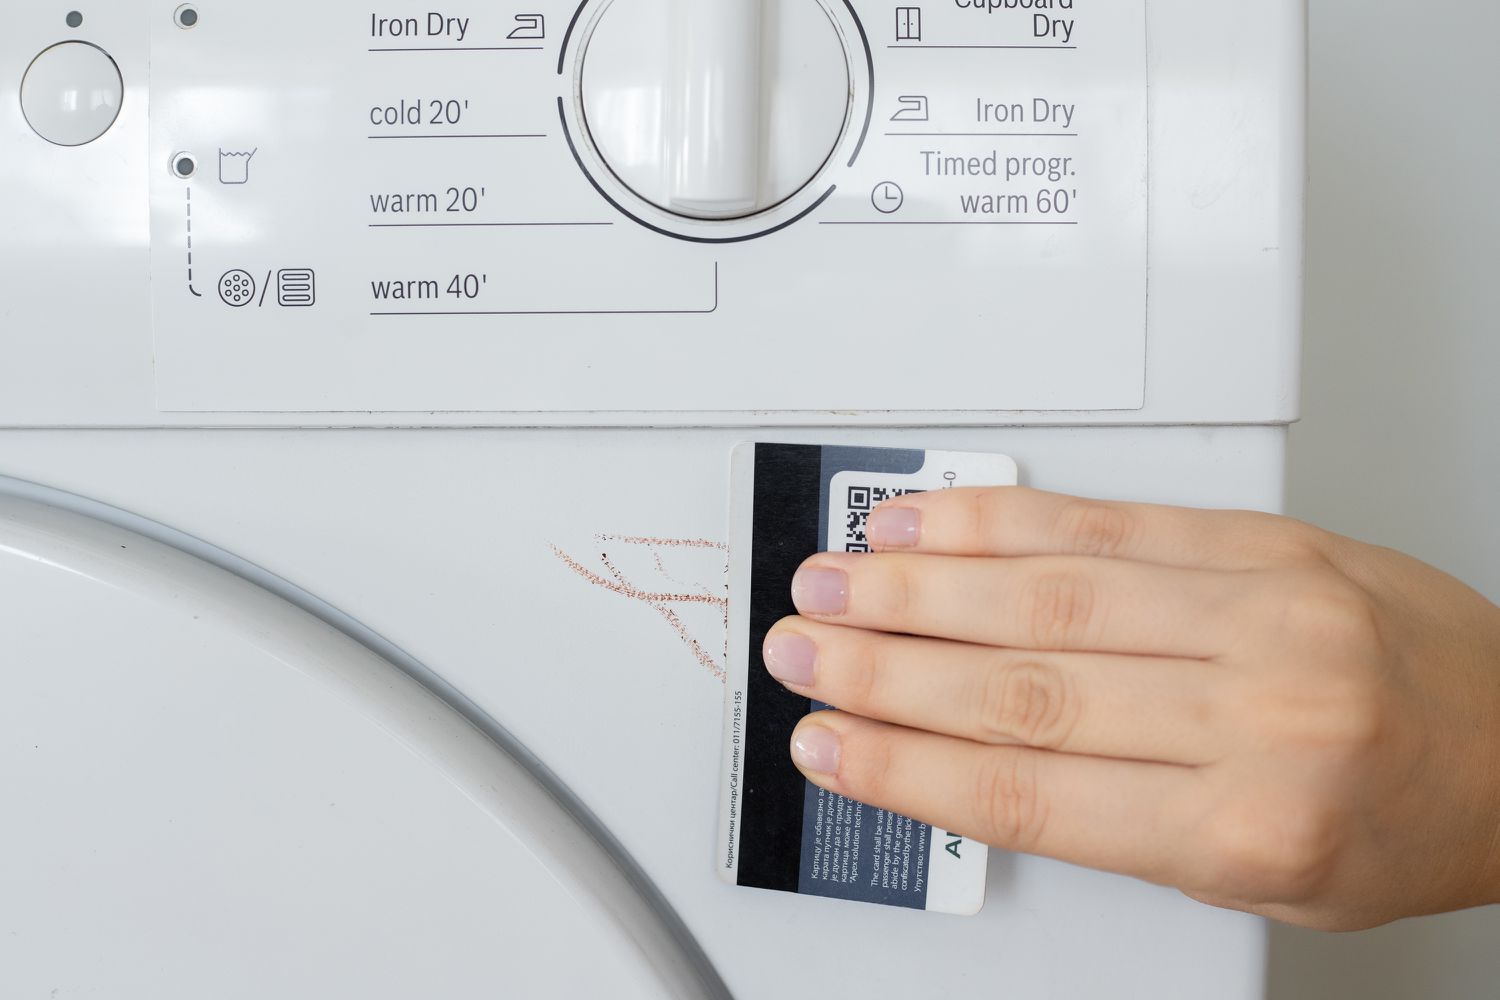 Credit card edge scraping off melted wax from exterior of washing machine